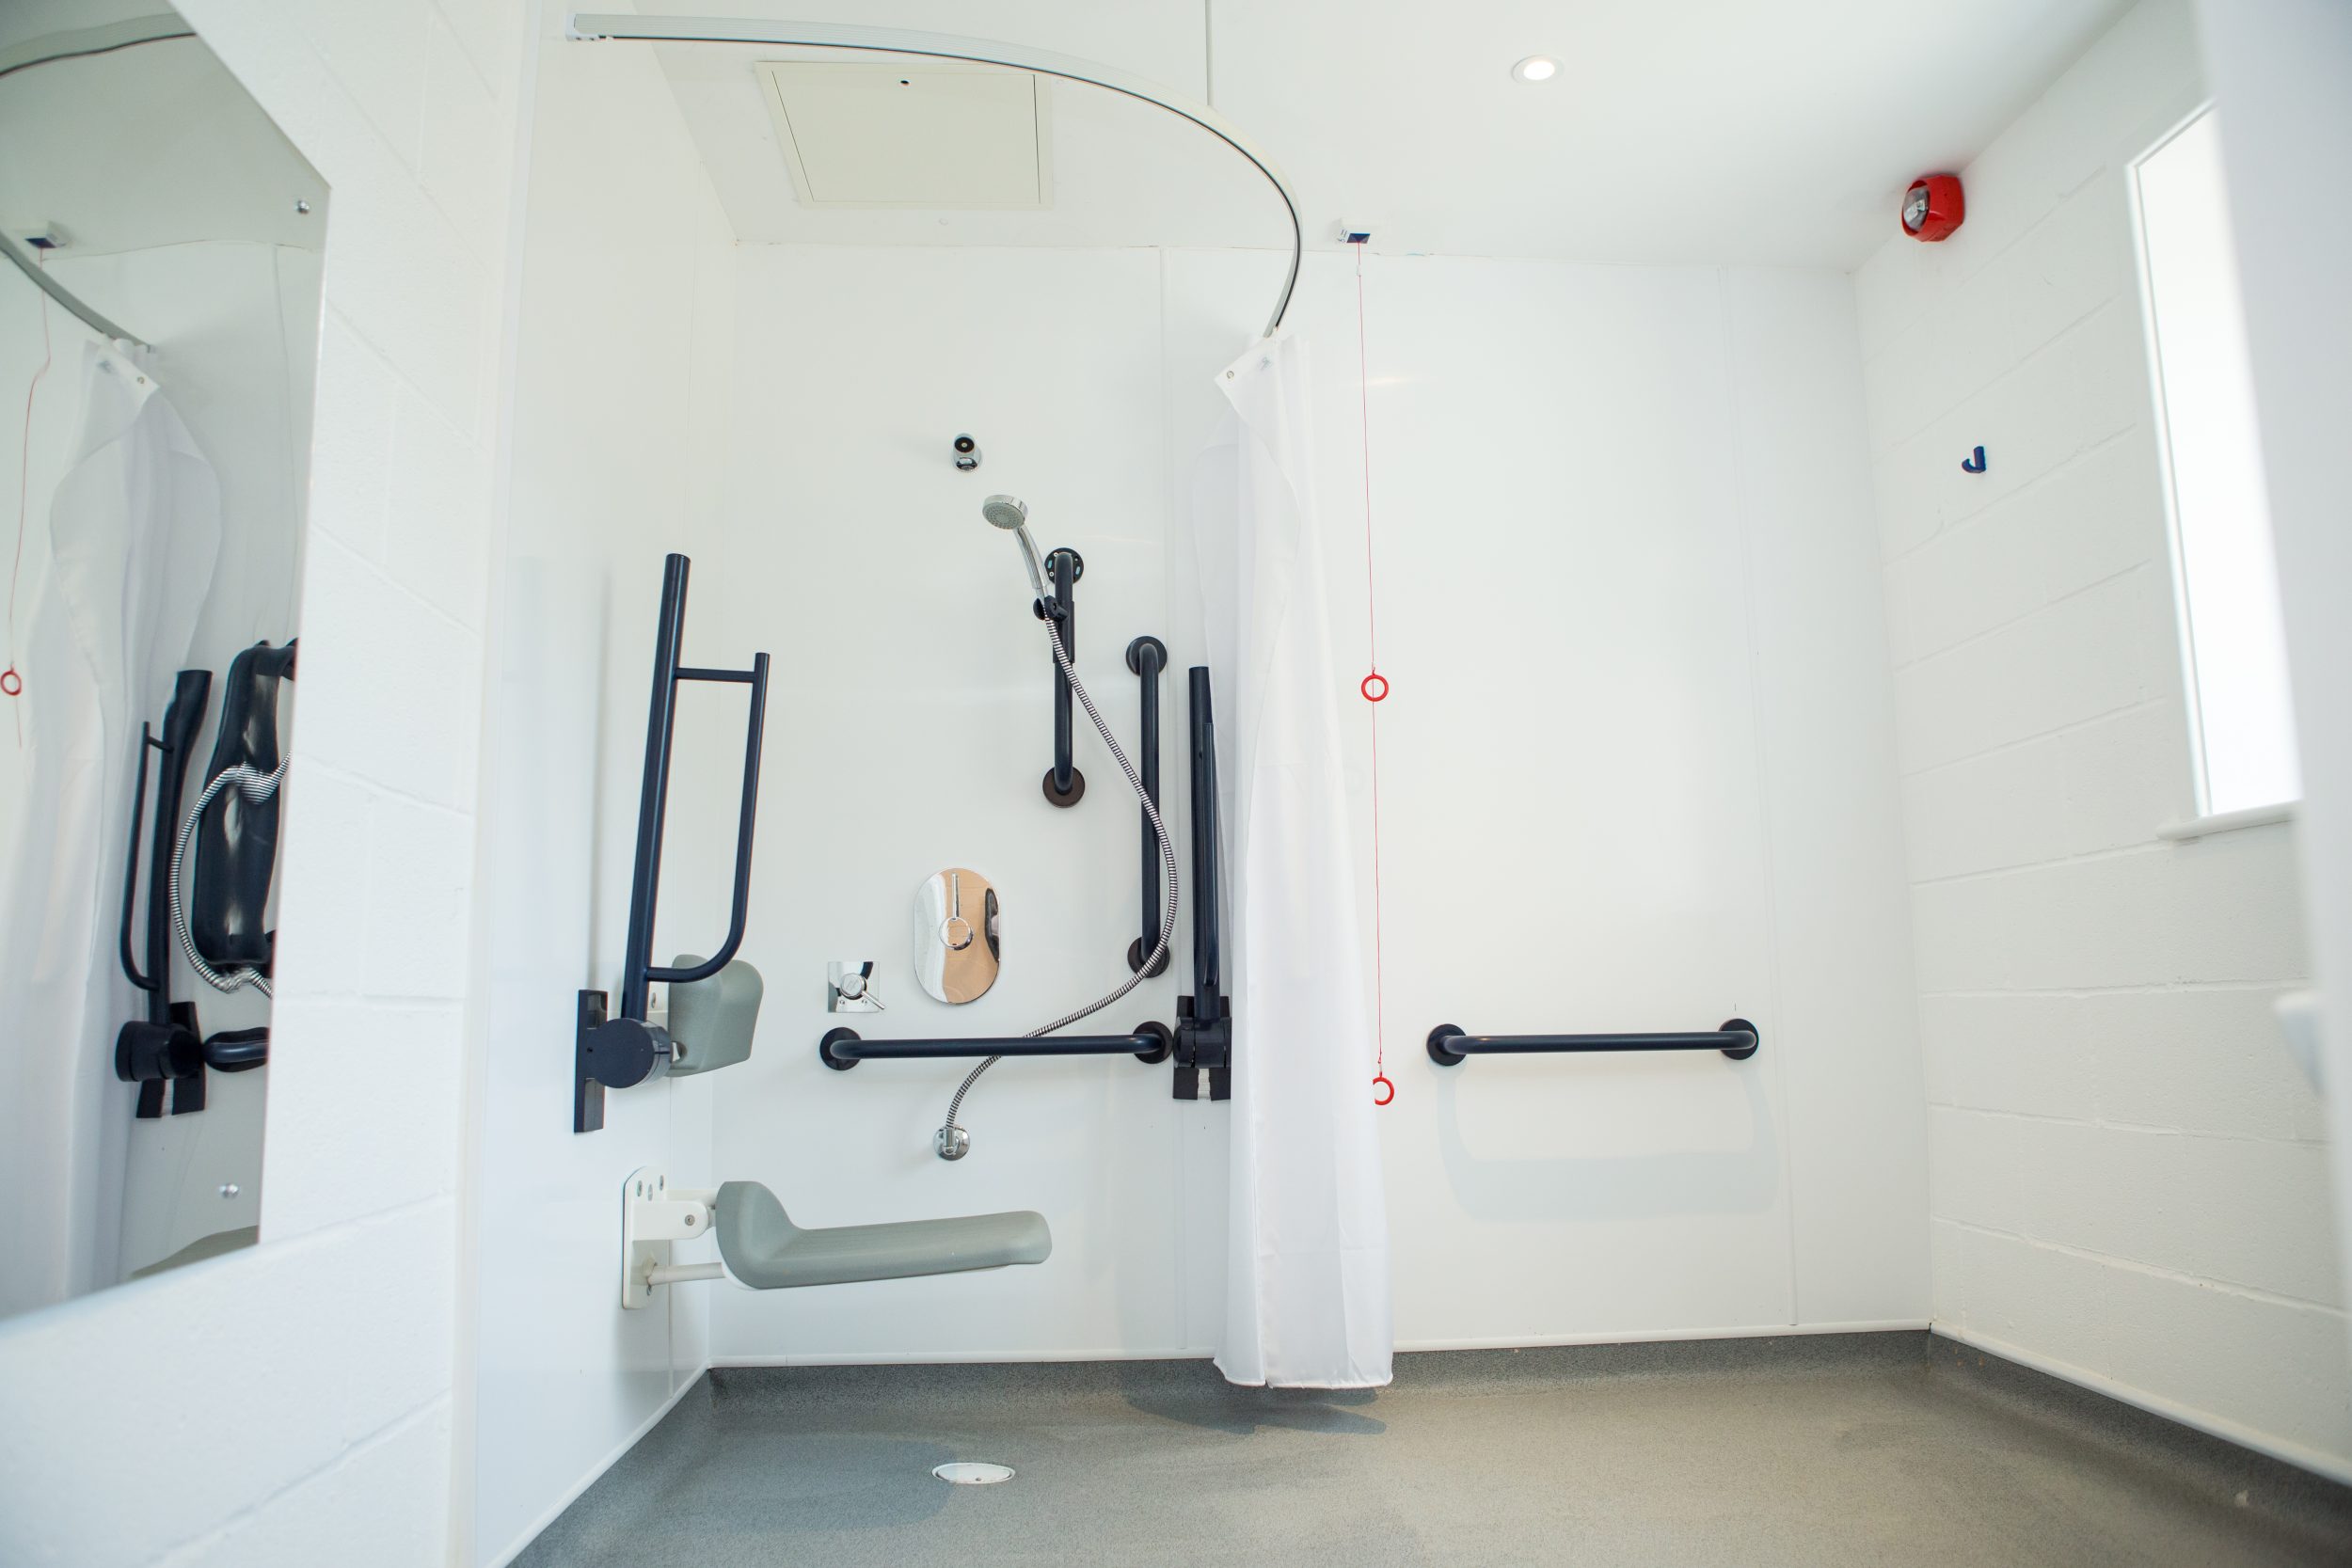 An image of Mount cook's disabled access sit down shower